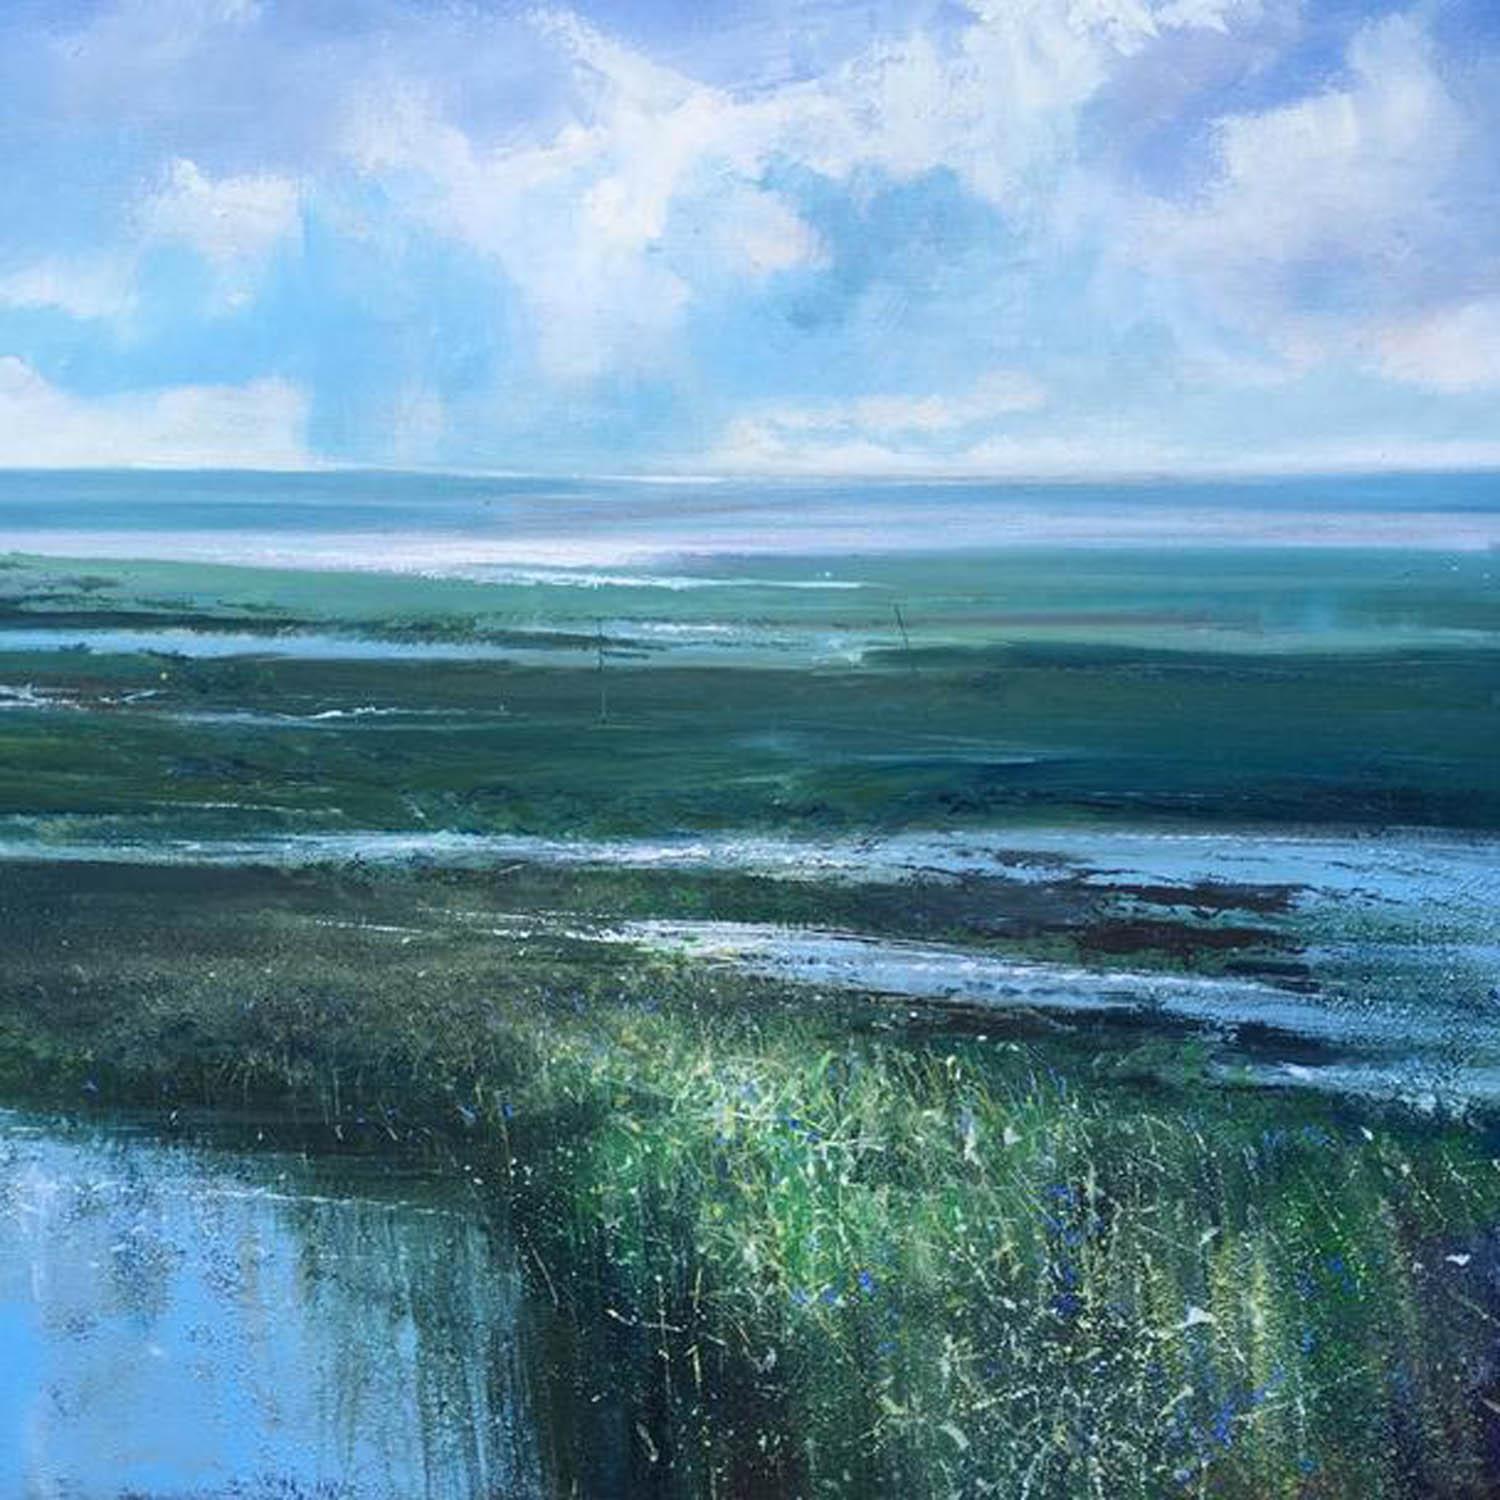 Jonathan Trim: "Low Tide."

An atmospheric estuary seascape depicting low tide, mud flats and marshland. The Thames estuary is the inspiration for this painting with its ever changing light making this a very special place.

Mixed media on boxed